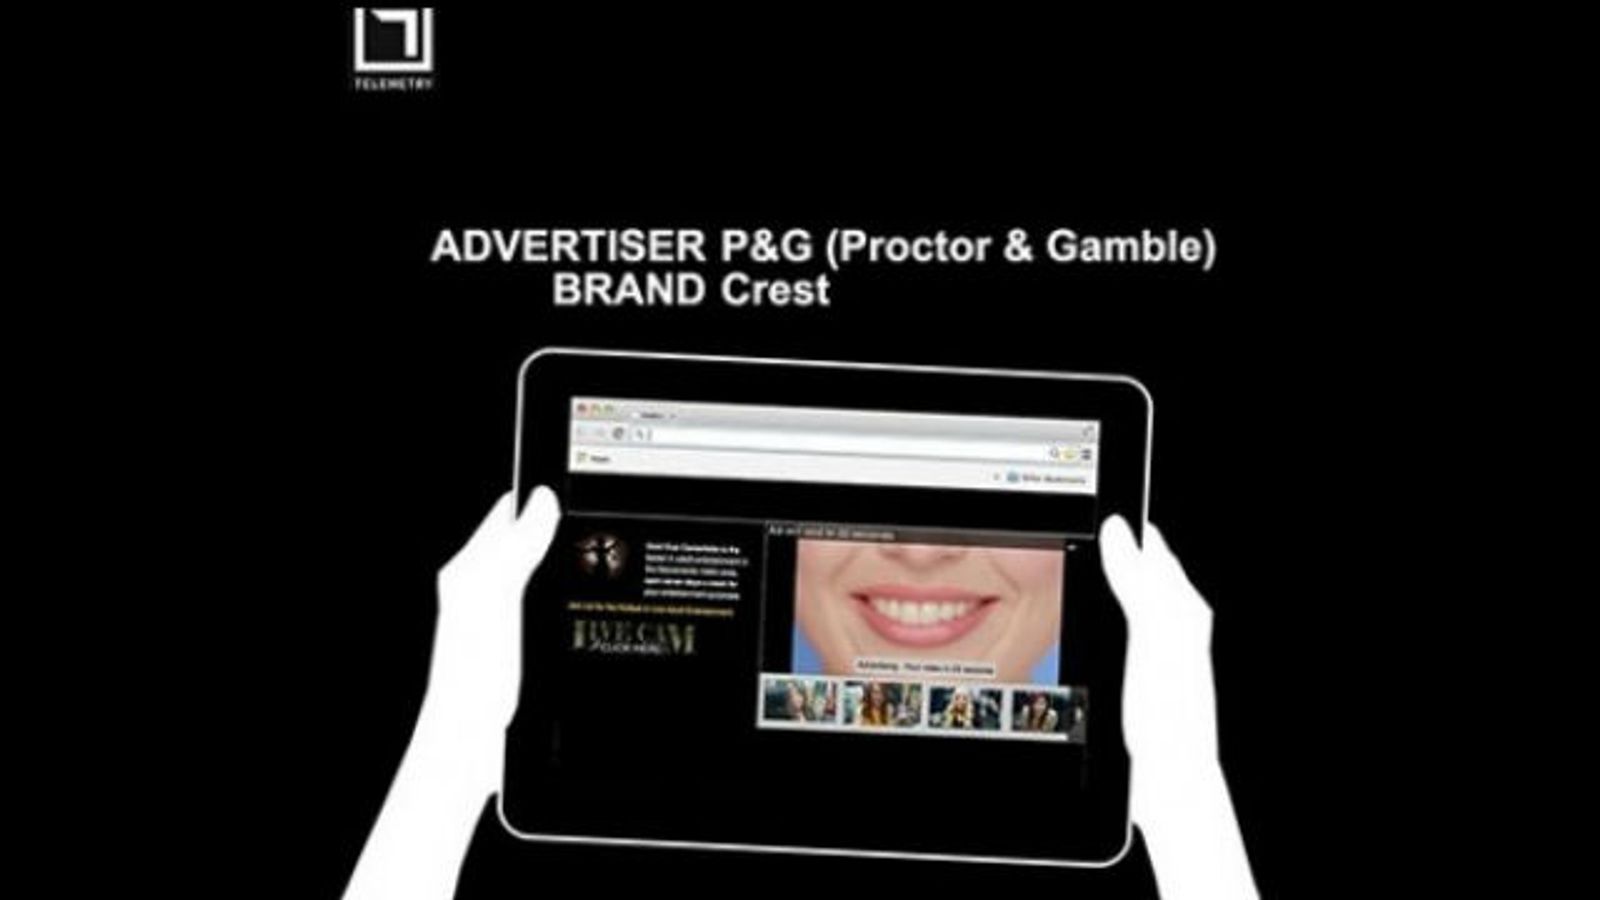 Geek.com: Major Brands Tricked Into Advertising on Porn Sites